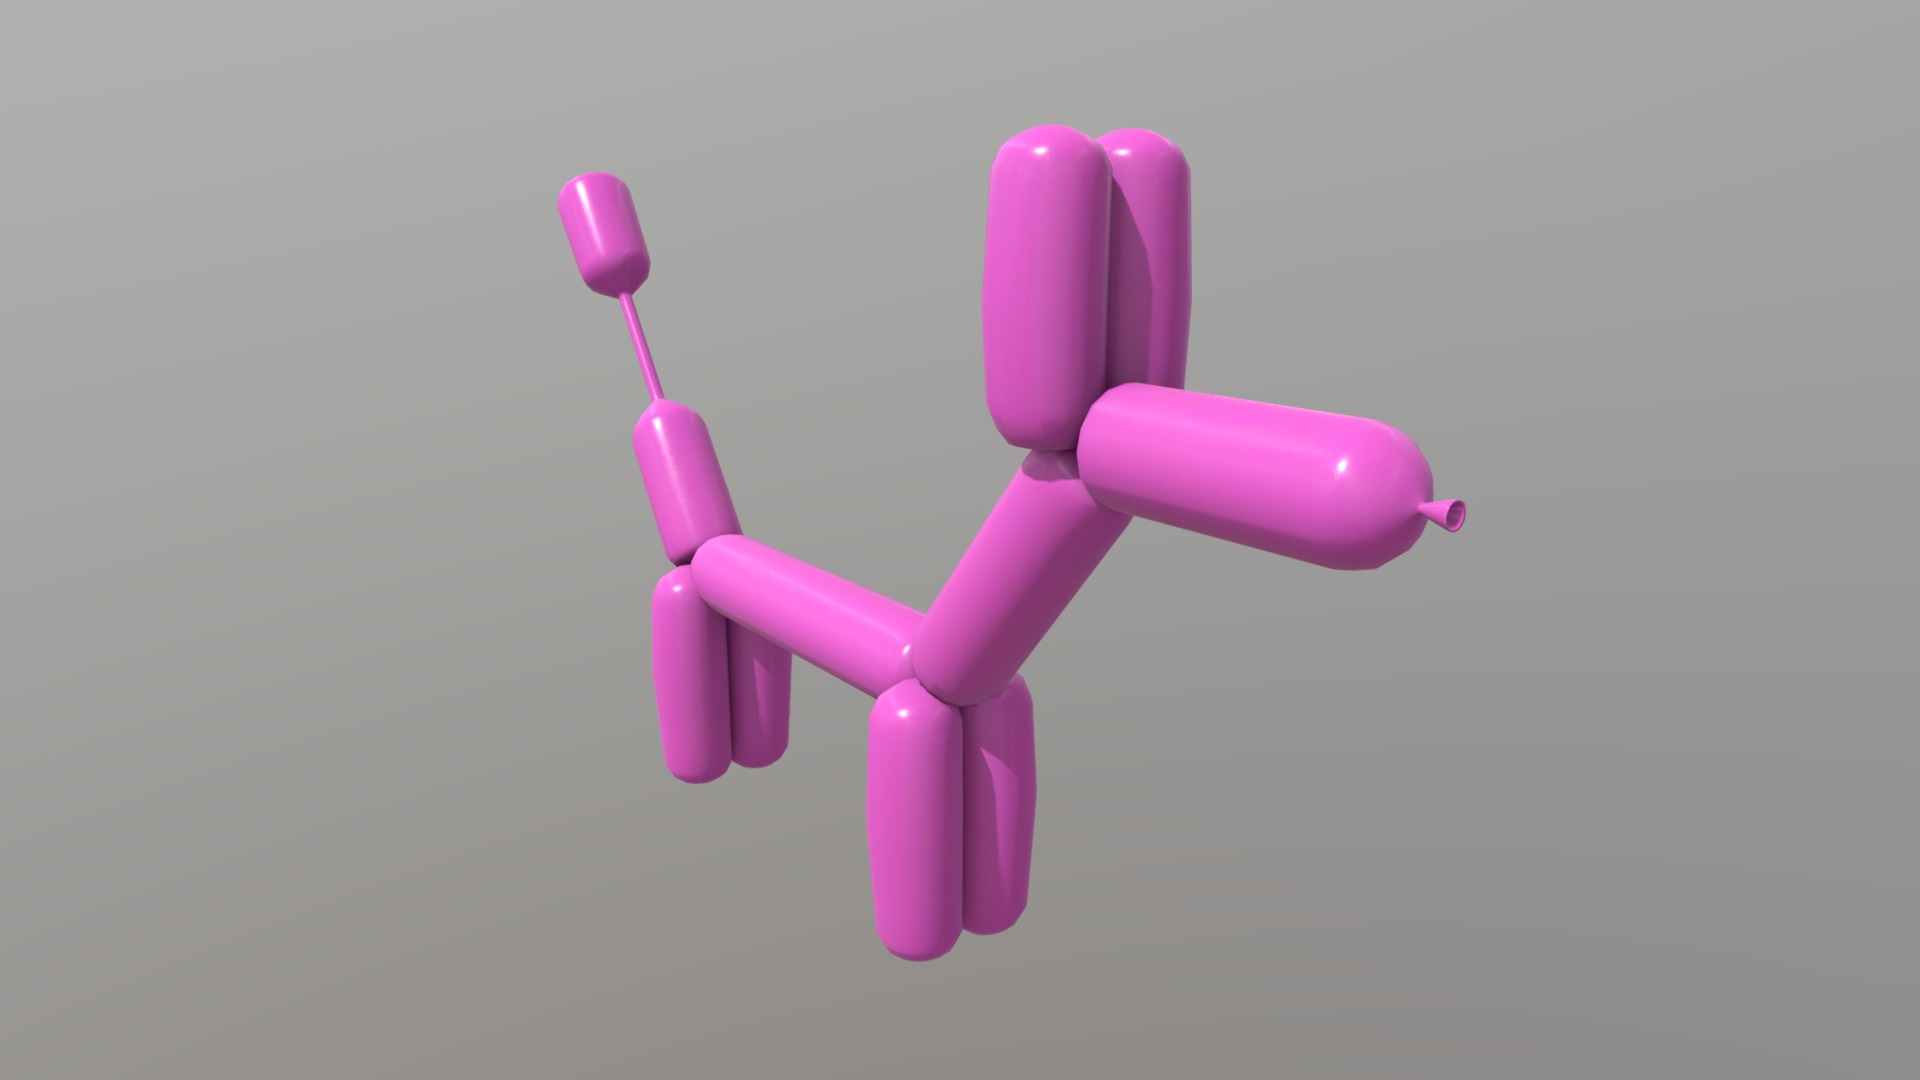 3D model Balloon Poodle - This is a 3D model of the Balloon Poodle. The 3D model is about a pink toy on a white surface.